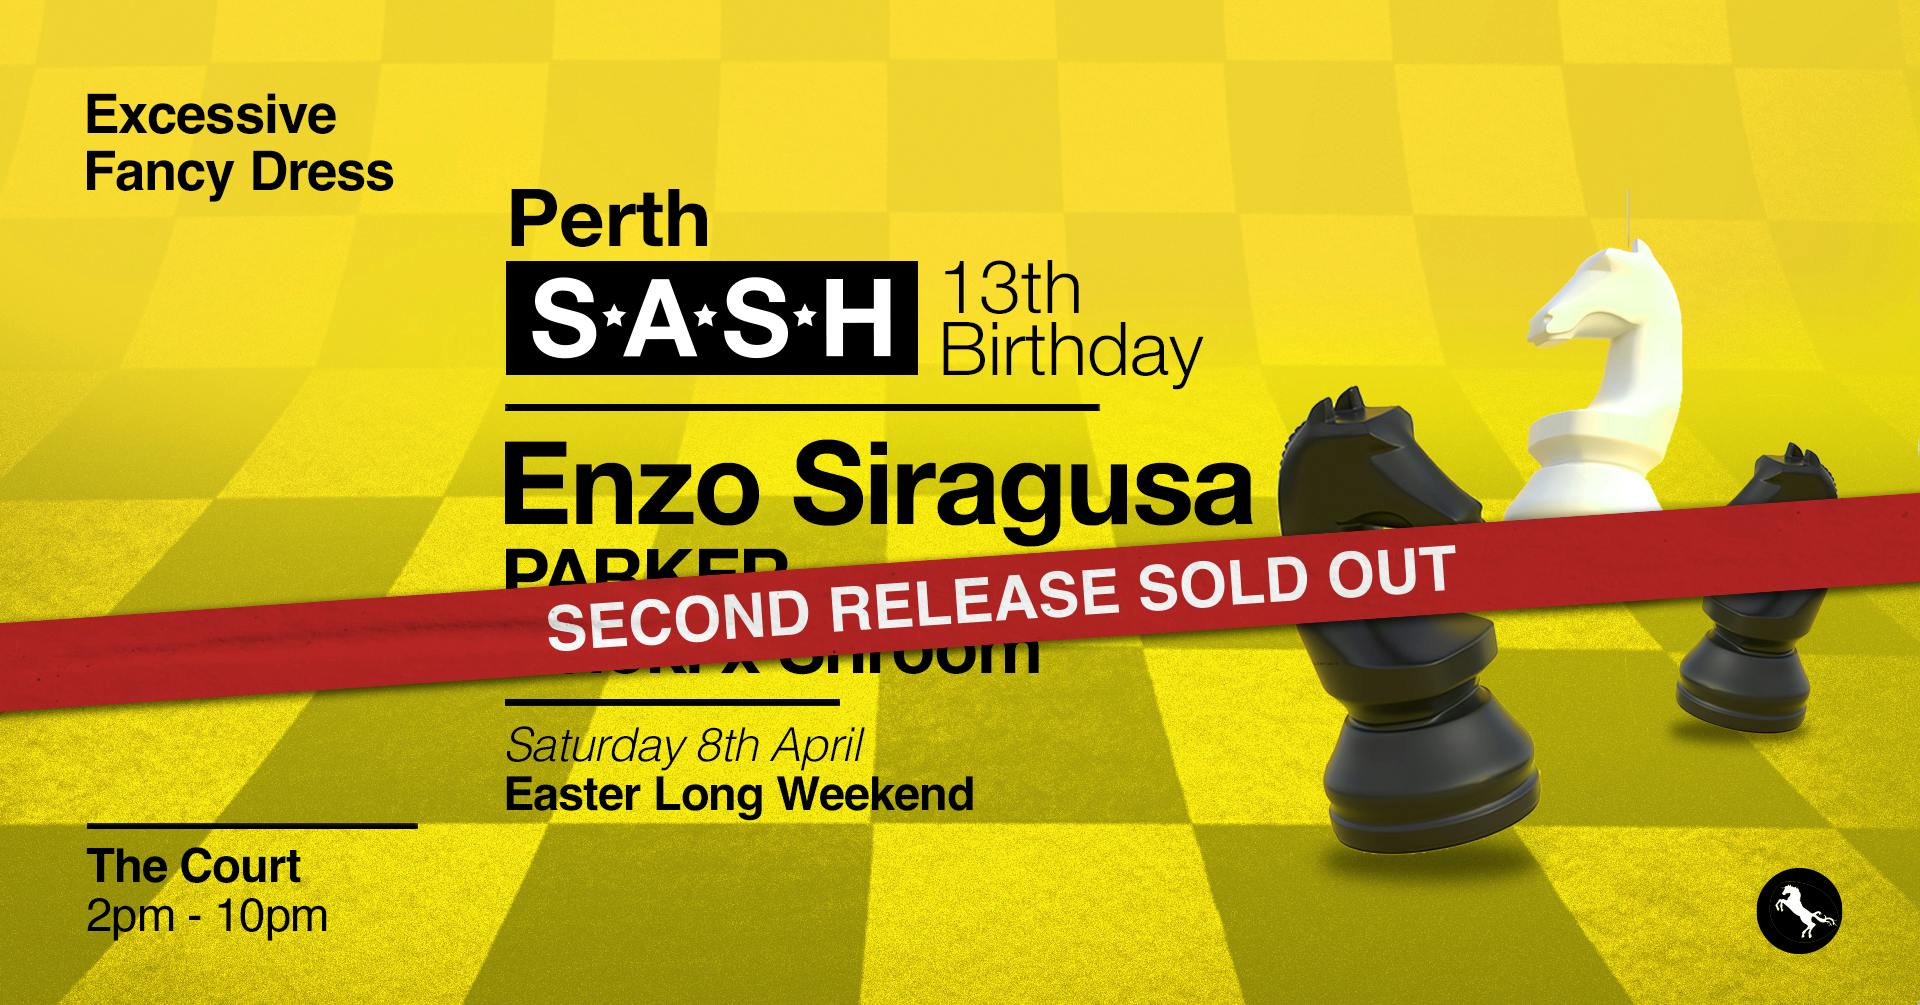 ★ S.A.S.H Perth 13th Birthday ★ Enzo Siragusa ★ Easter Long Weekend ★ 8th April ★ Excessive Fancy Dress ★